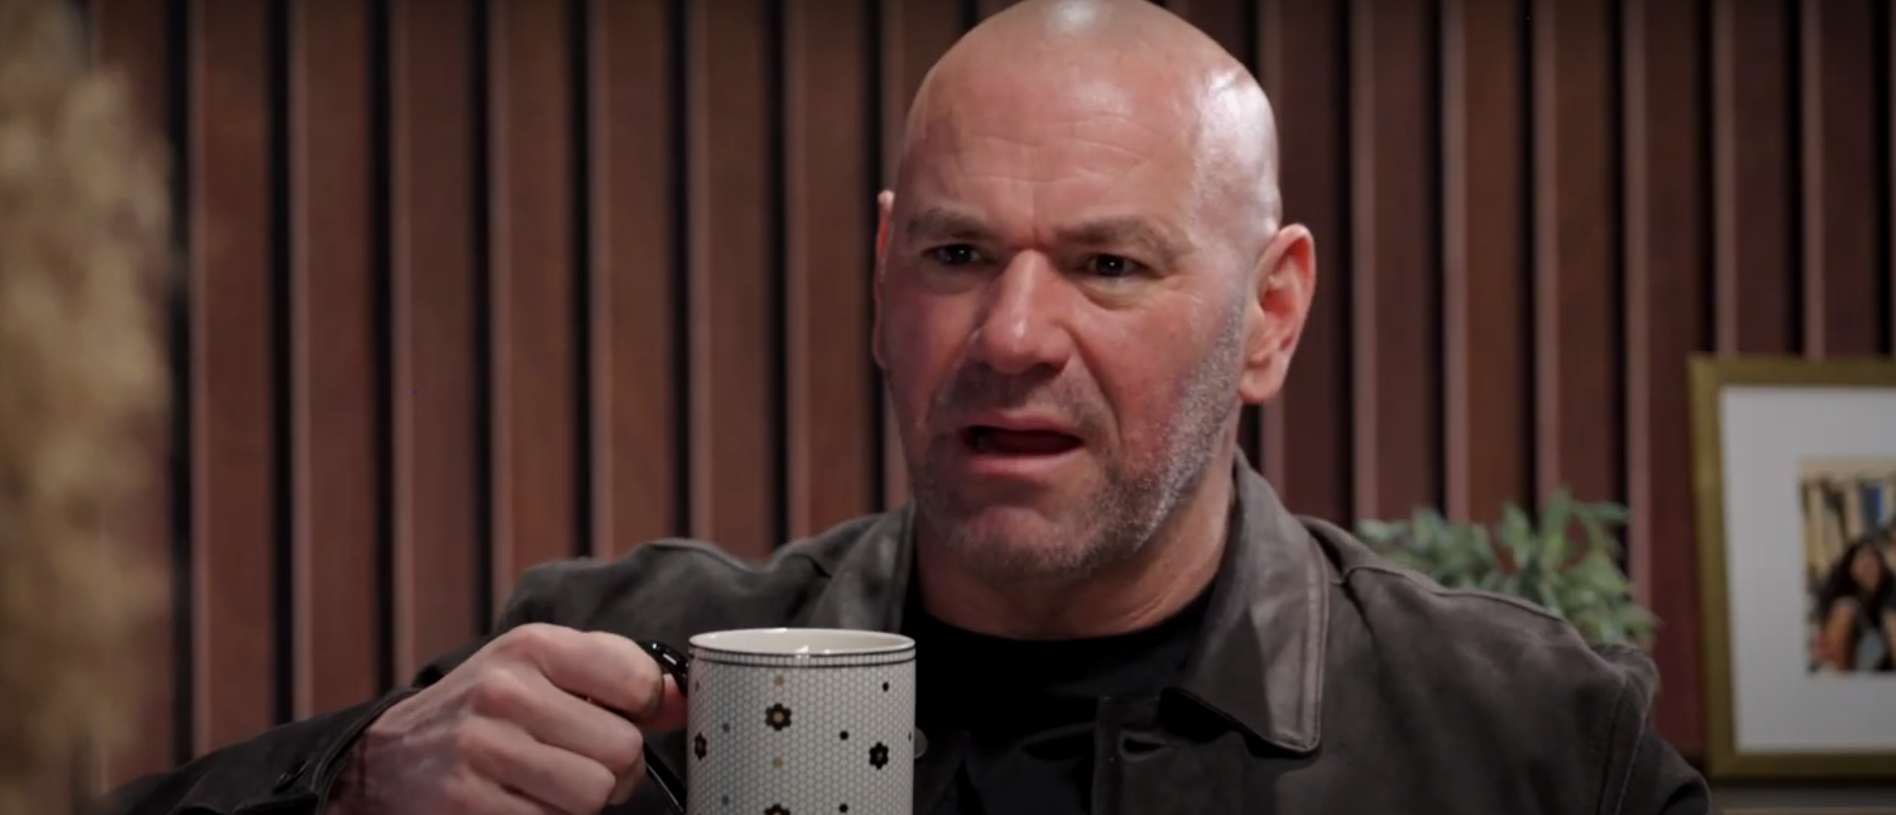 ‘She Thought I Was F*cking Joe Rogan’: Video Shows Dana White’s Hilarious Response To Former ESPN Host’s Mix-Up